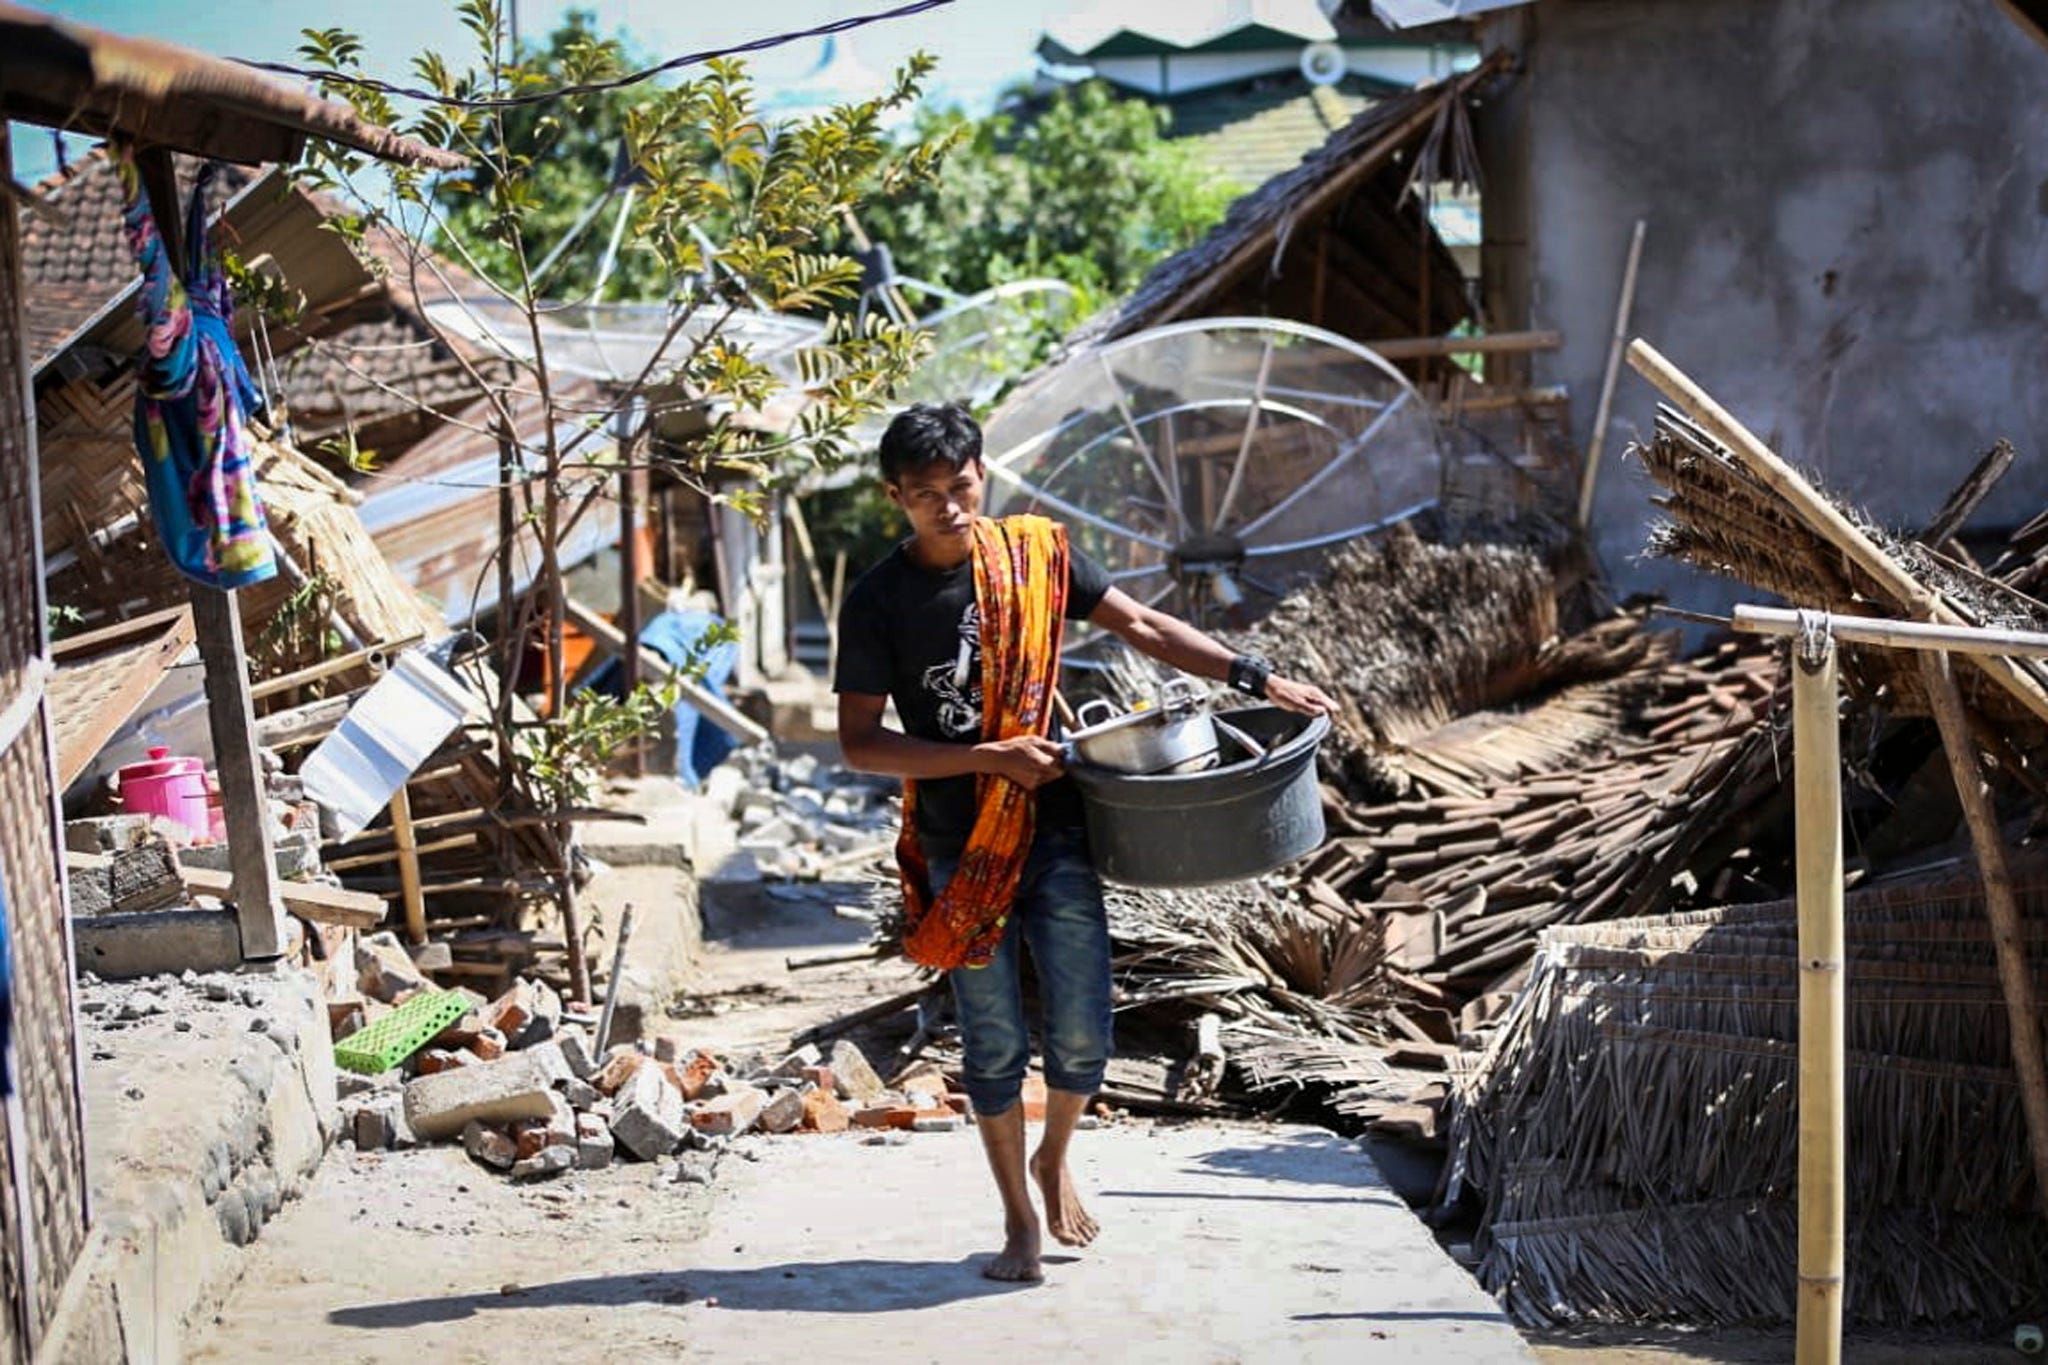 An Indonesian man collects his belongings from his collapsed house after an earthquake struck in North Lombok, West Nusa Tenggara, Indonesia, on Aug. 6, 2018. According to media reports, a 7.0 magnitude quake hit Indonesia's island of Lombok on Aug. 